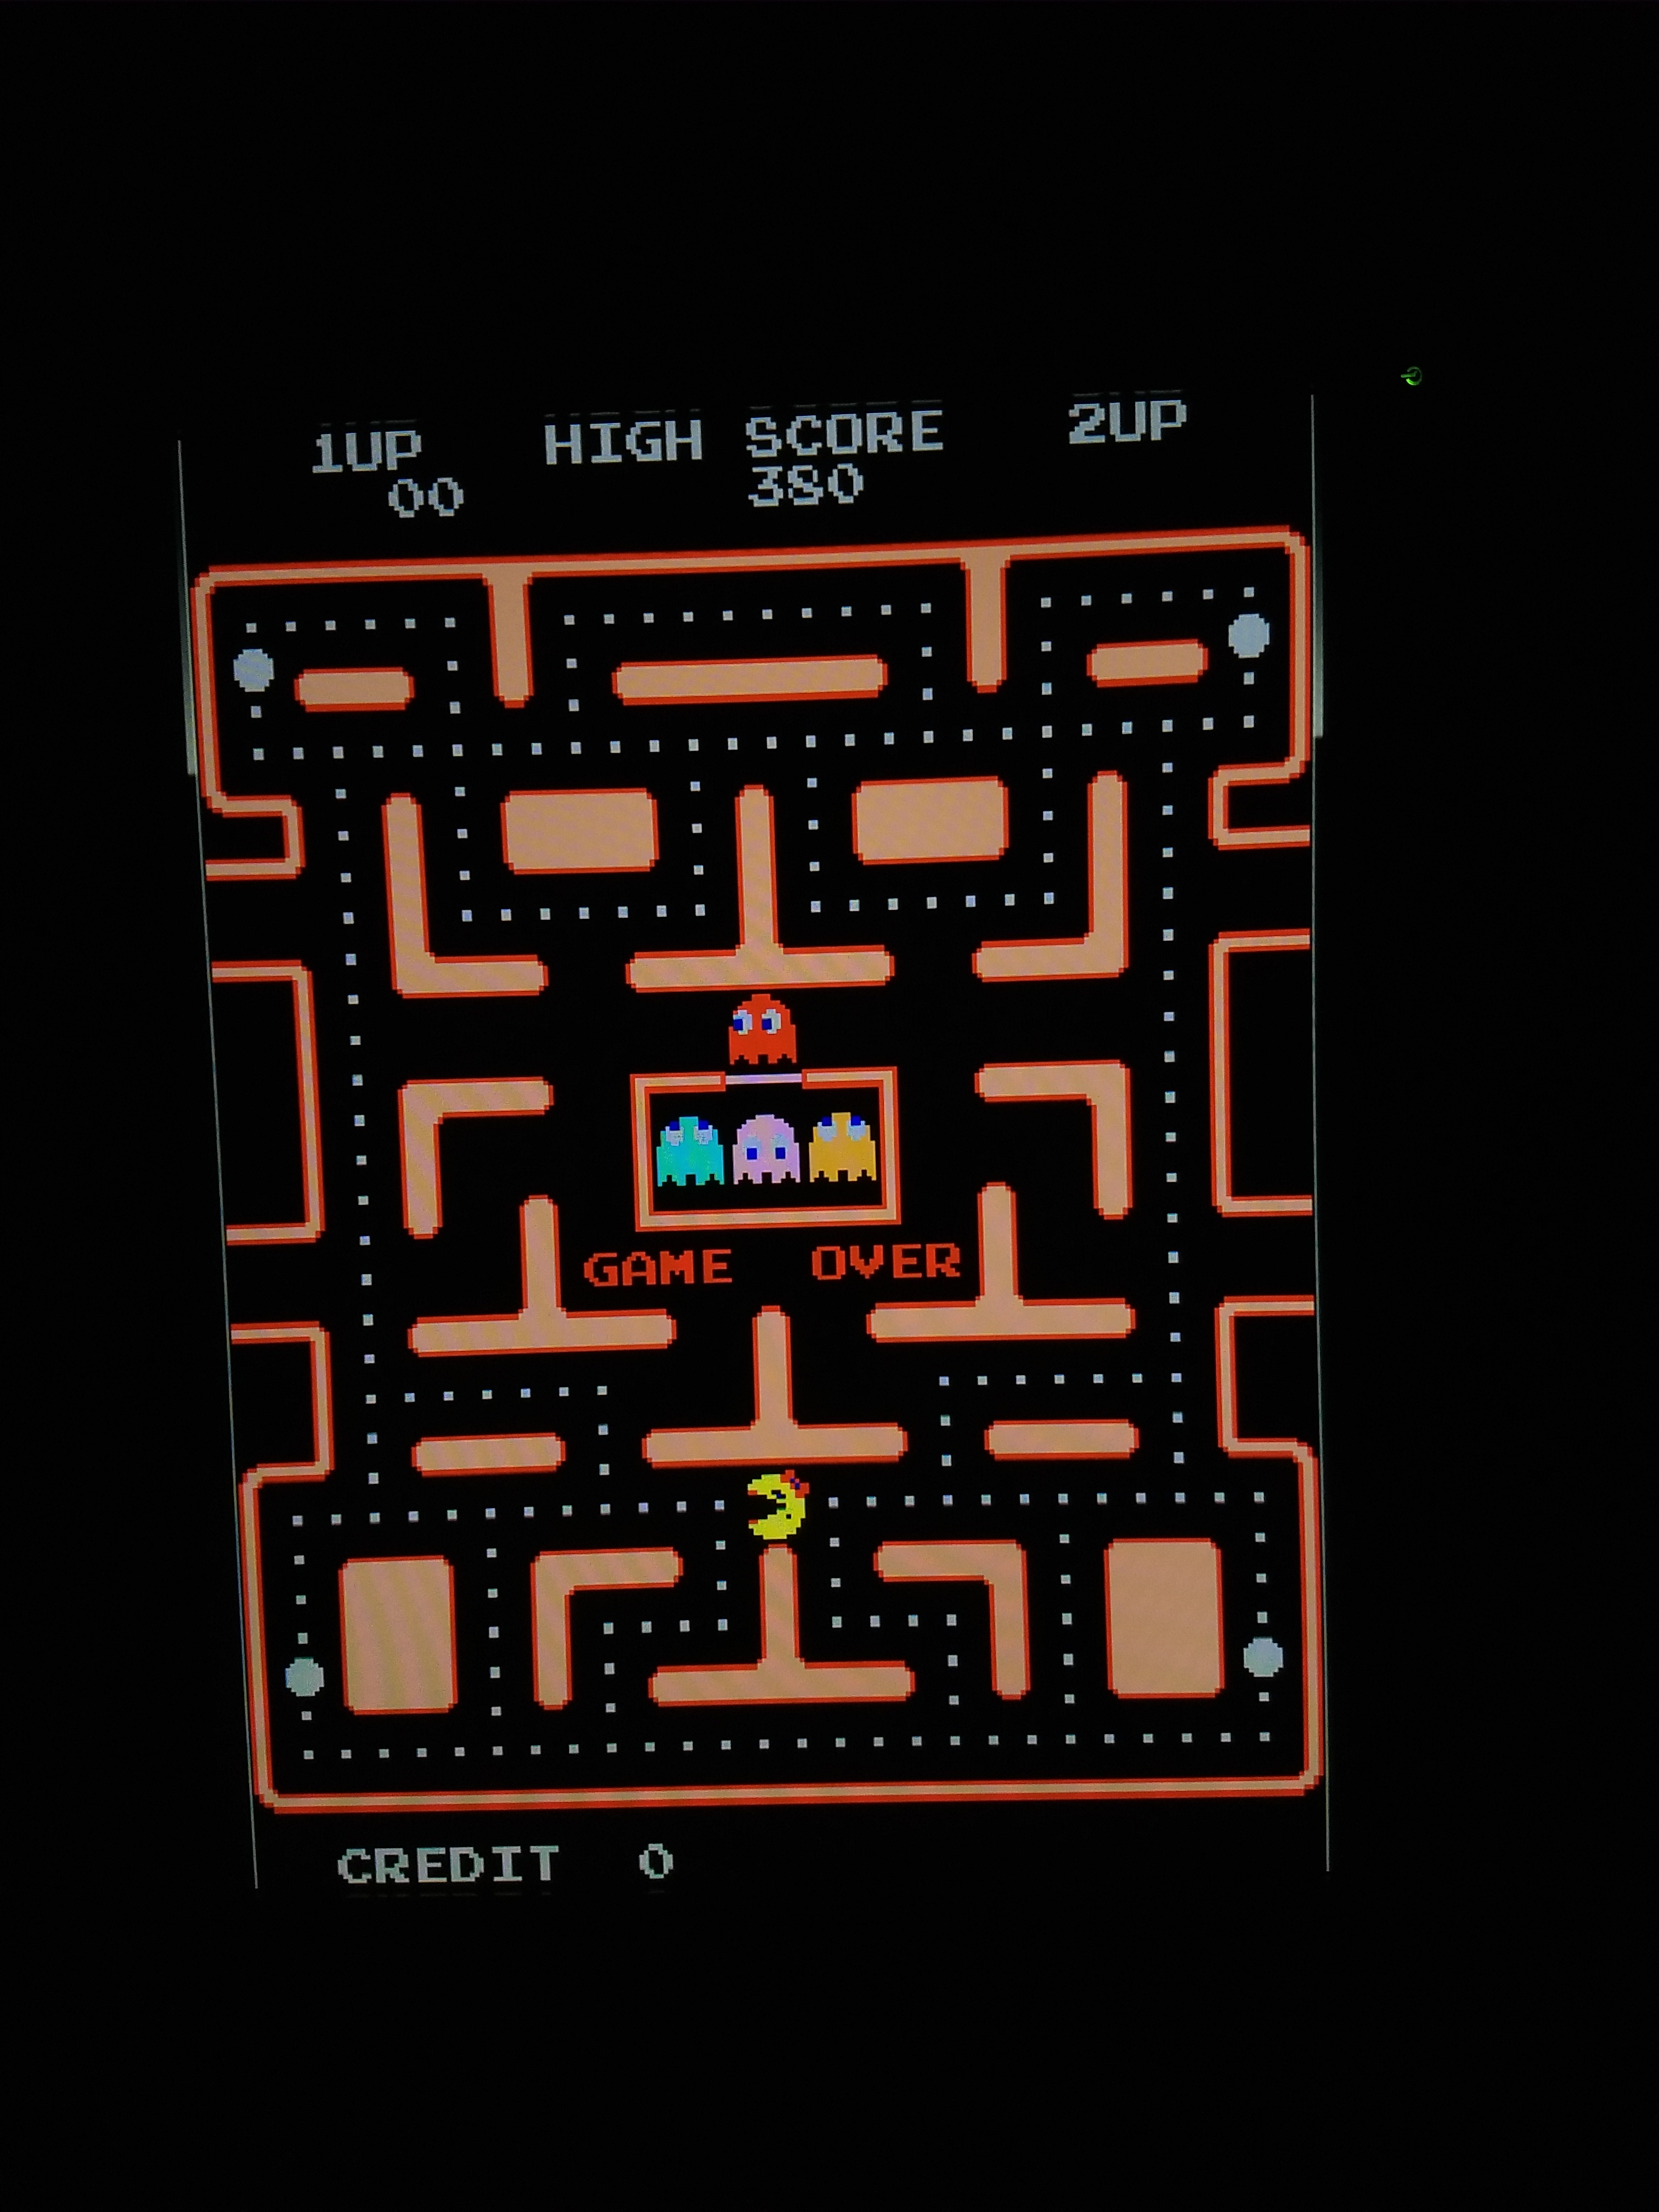 Pac-Man screen image from the Chill Out Arcade